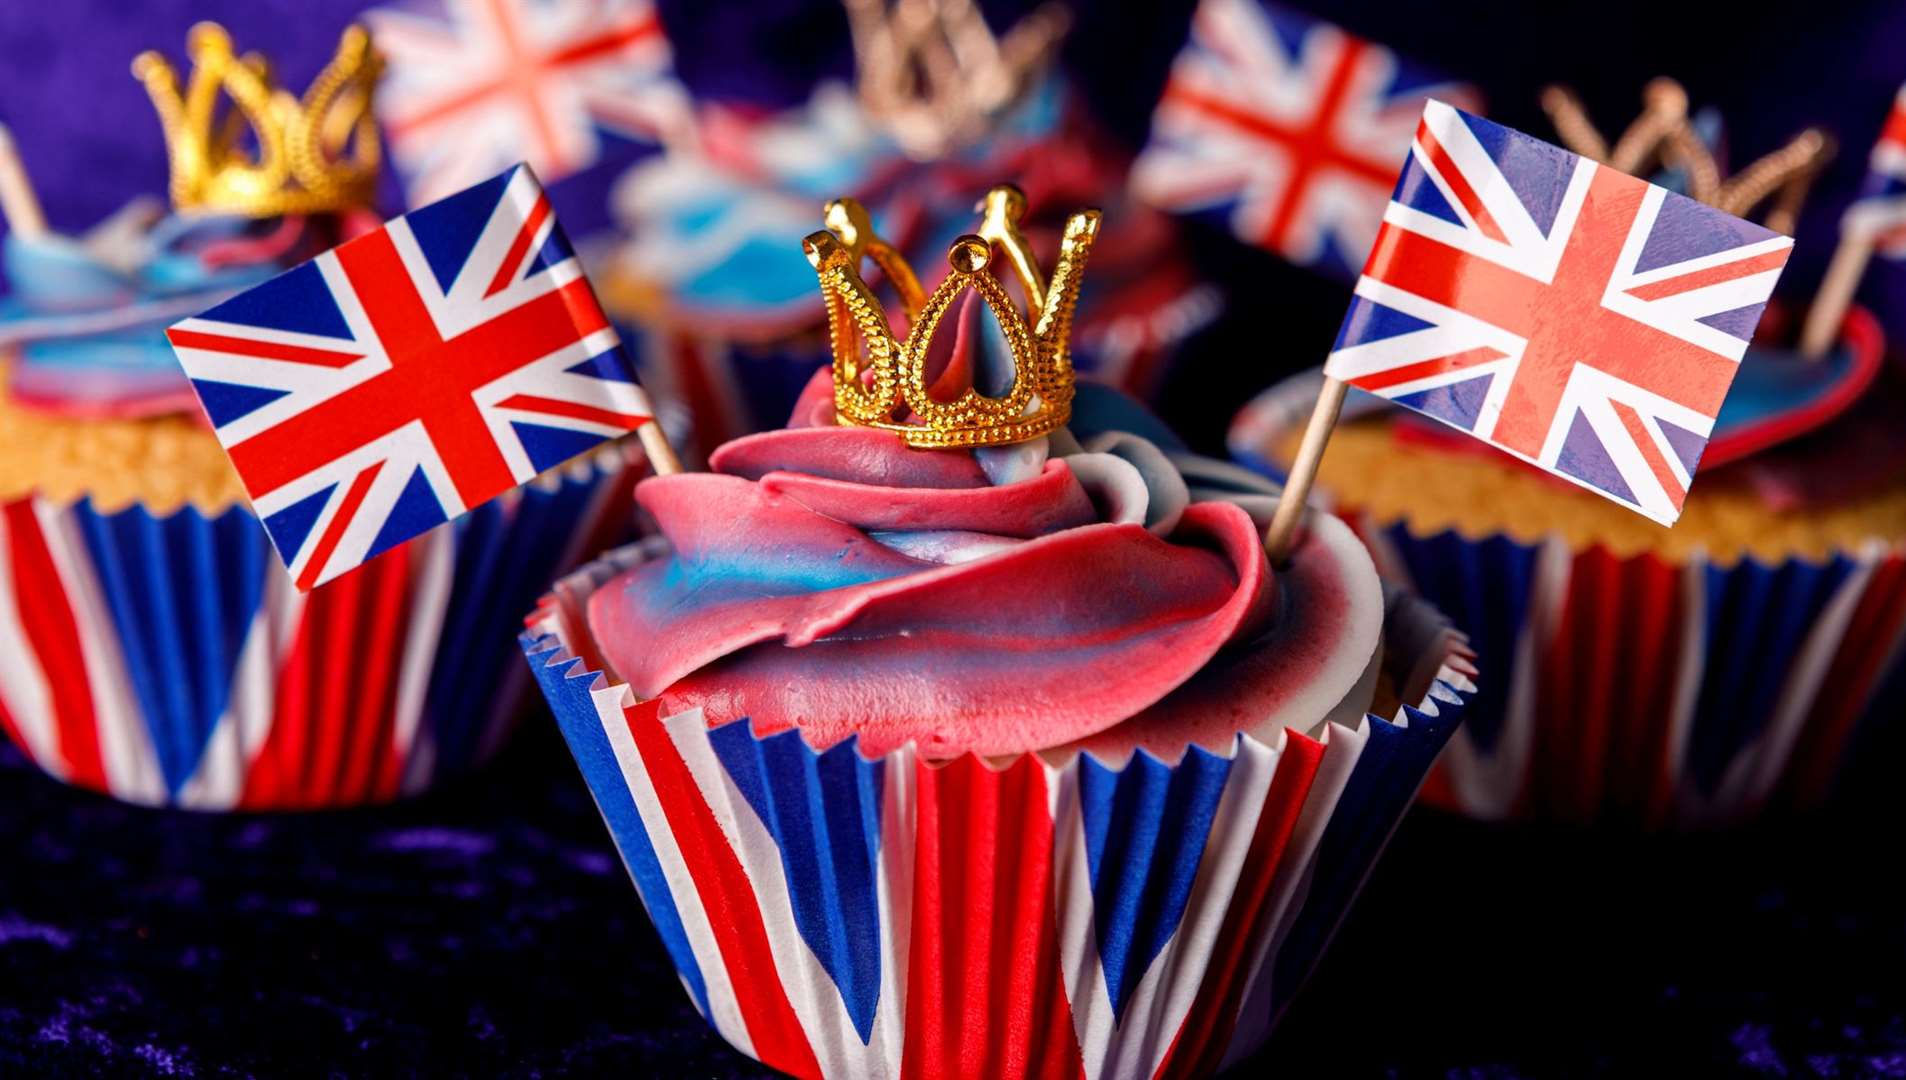 There will be plenty of royal treats on offer over the weekend. Picture: iStock